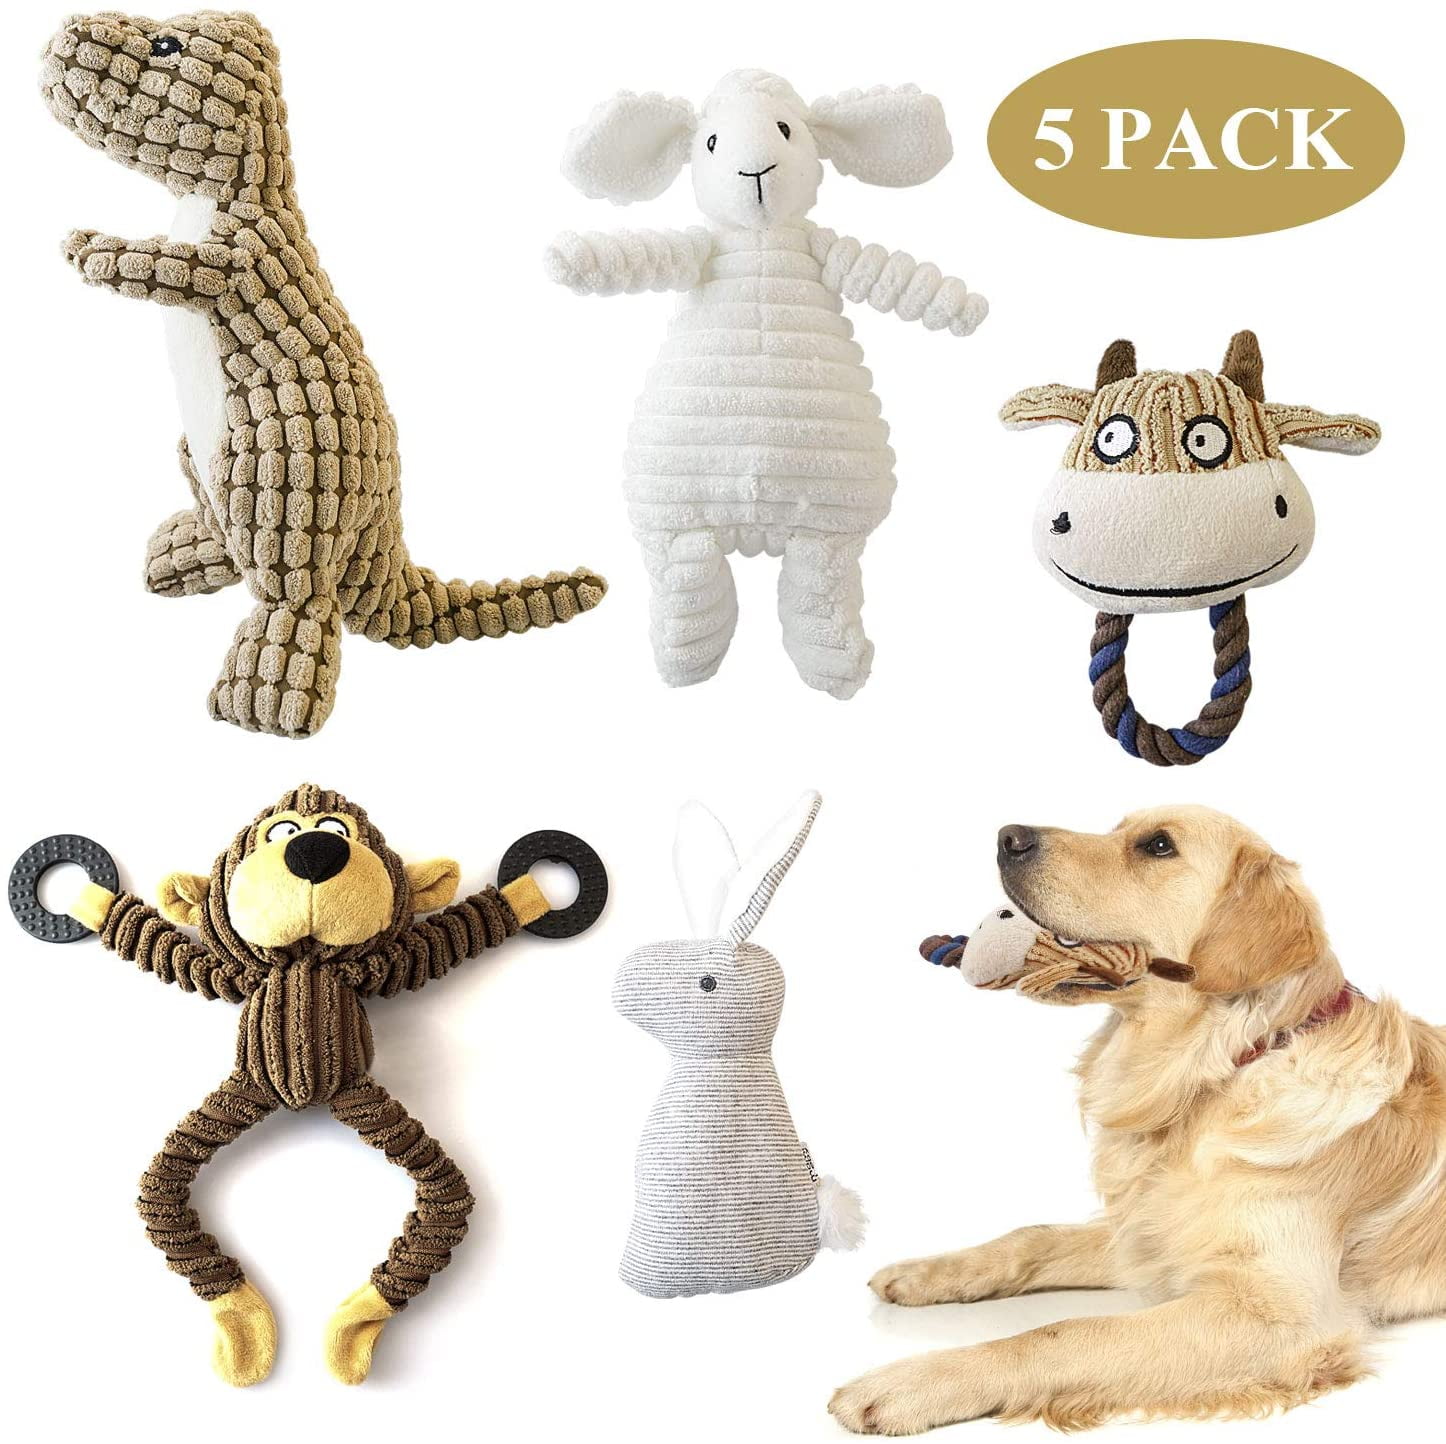 Large Dogs 5 Pack Dog Squeaky Toys Durable Plush Stuffed Pet For Small Medium 